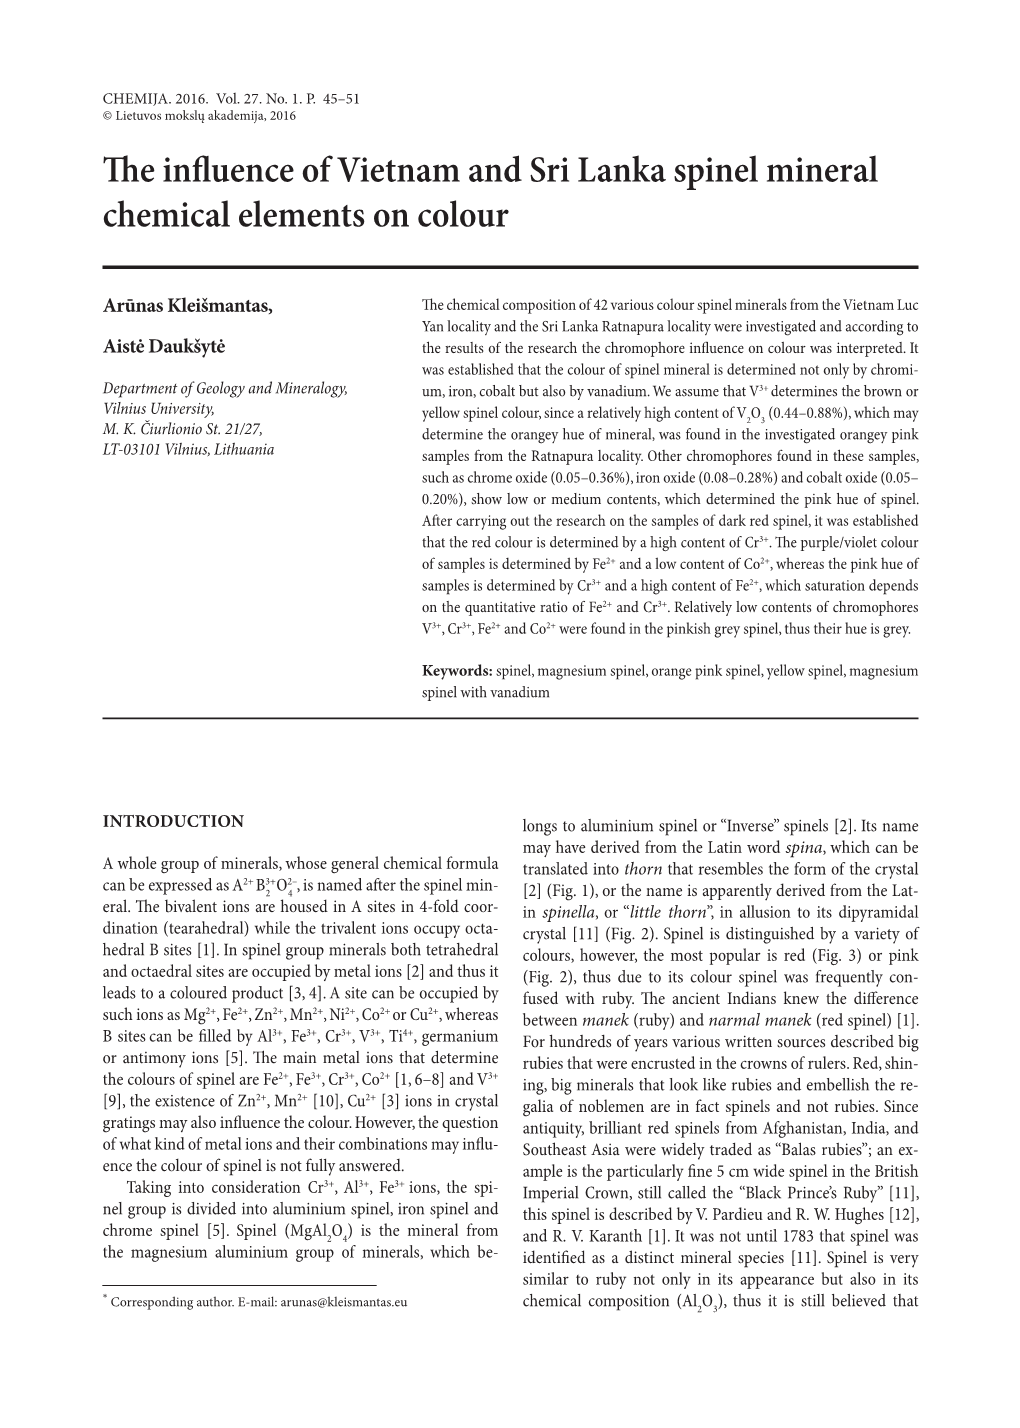 The Influence of Vietnam and Sri Lanka Spinel Mineral Chemical Elements on Colour